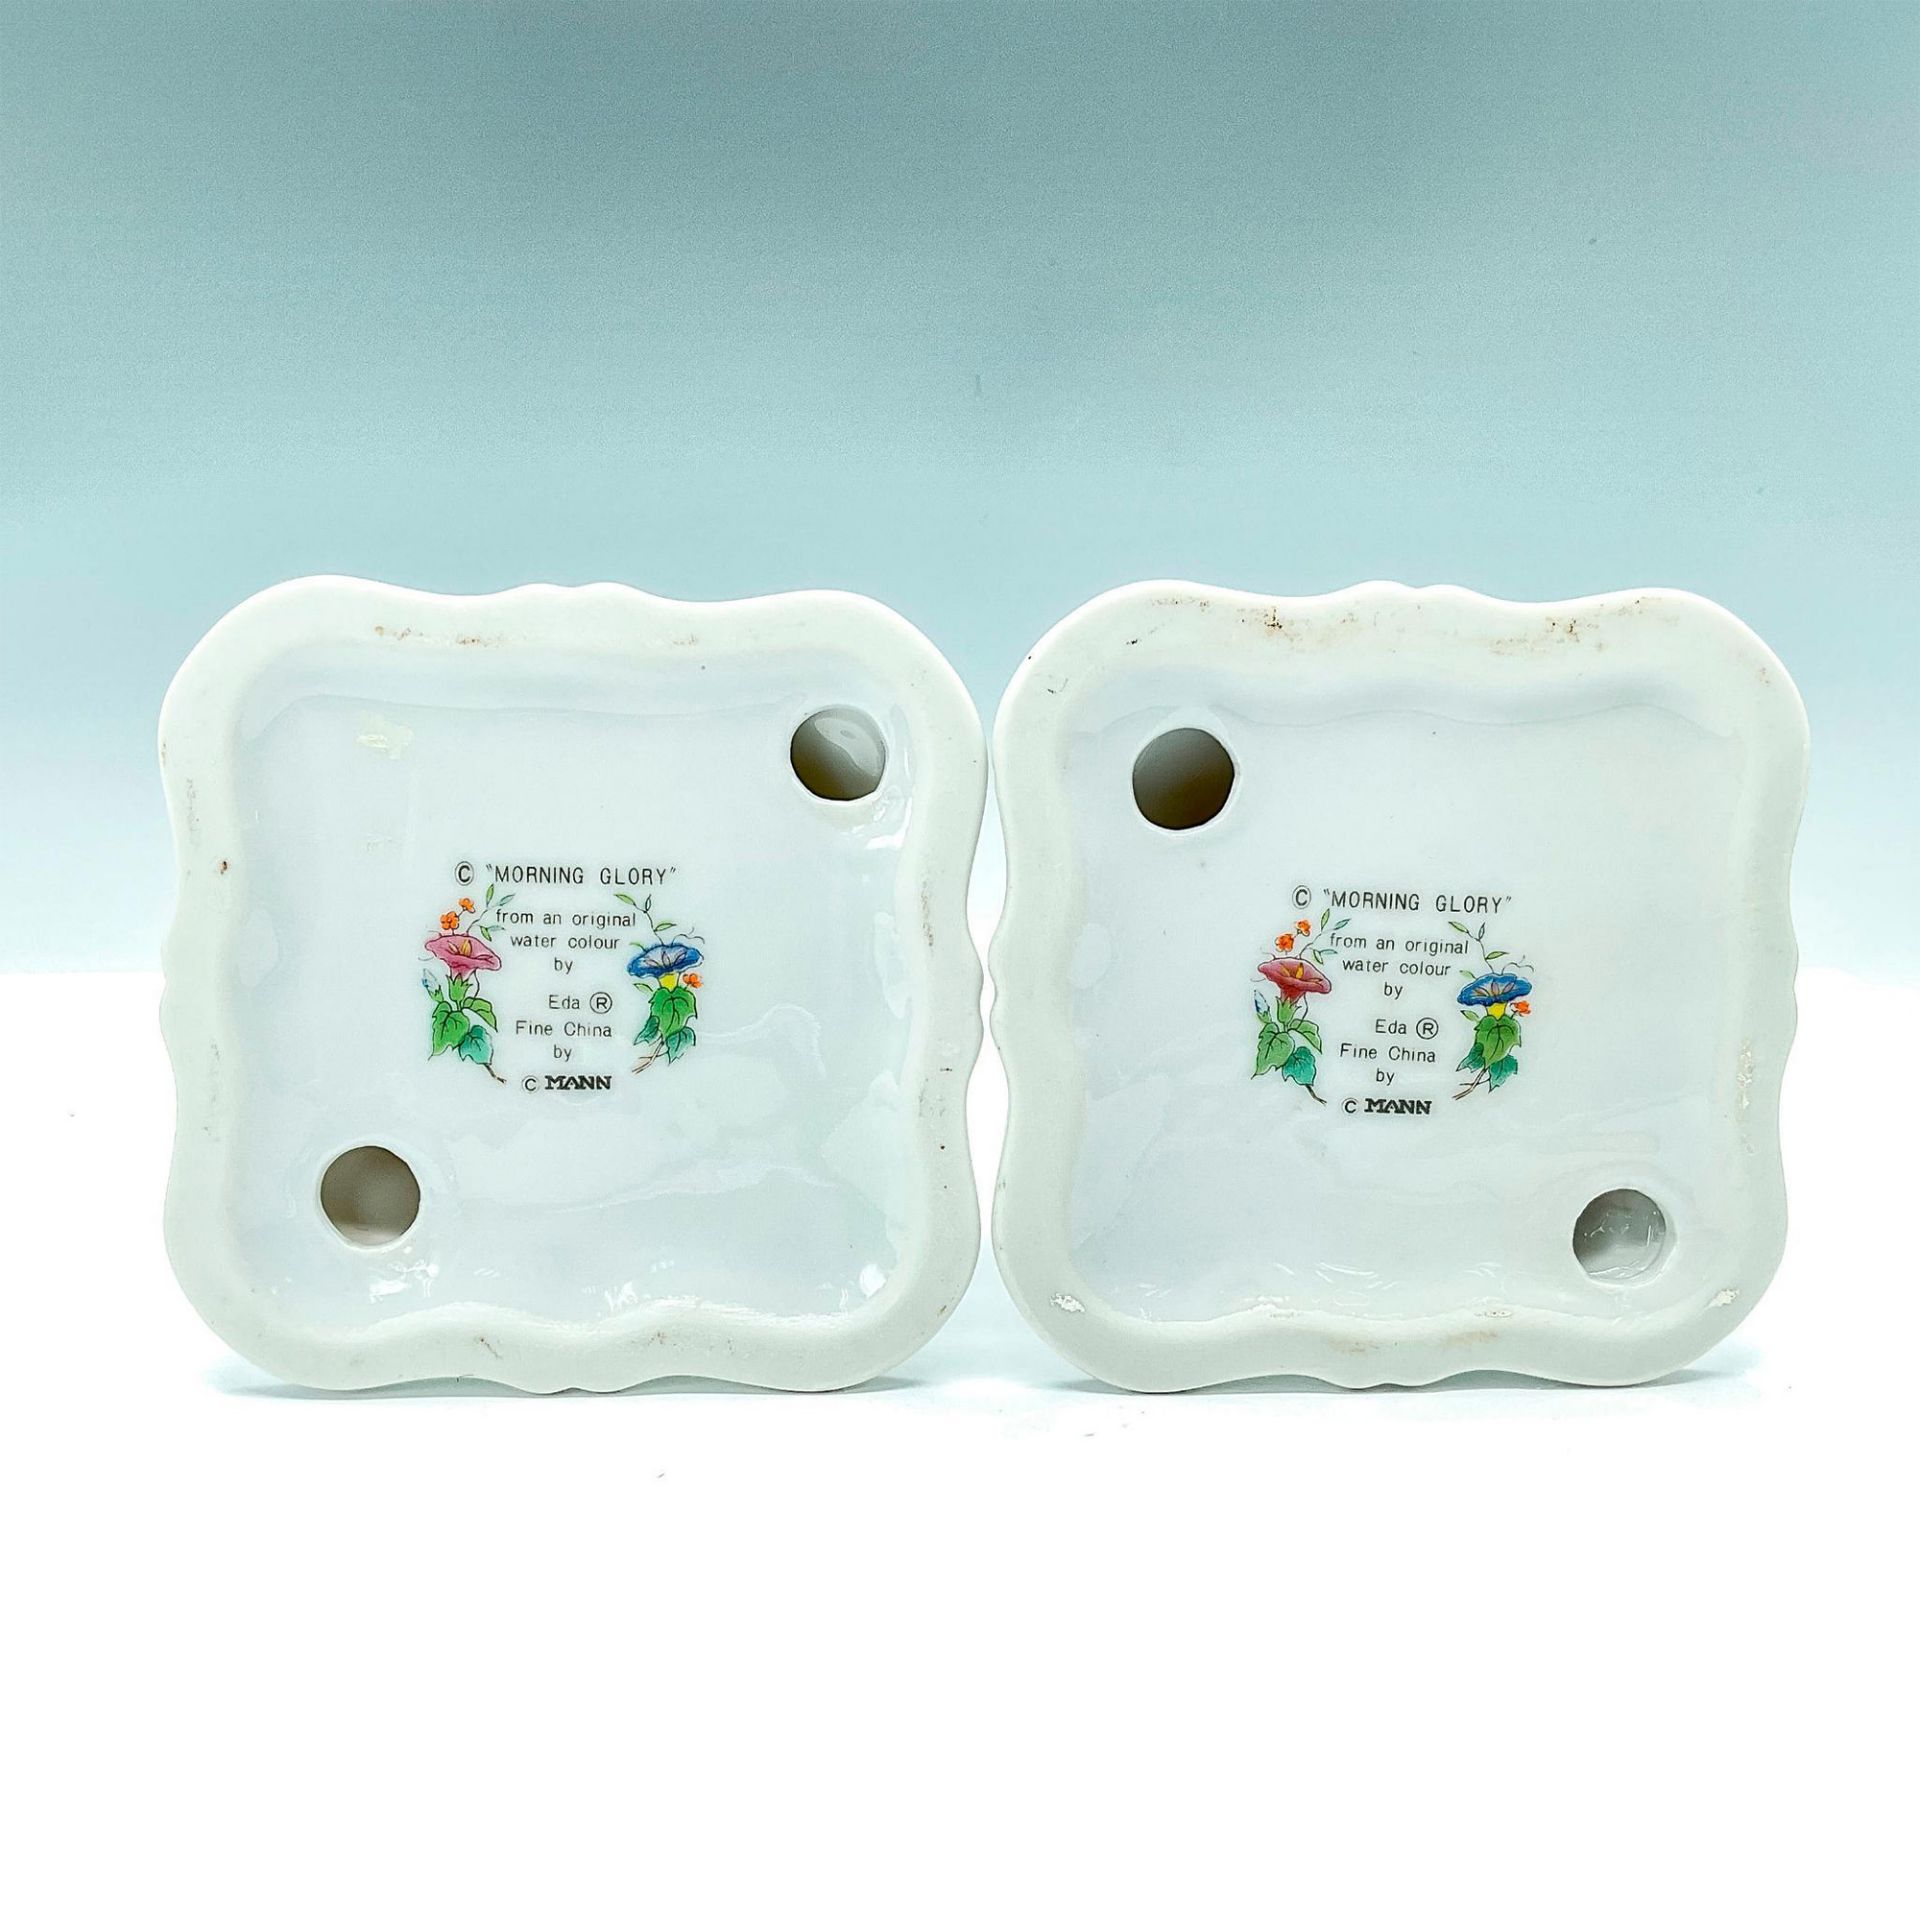 Pair of Mann Porcelain Candleholders, Morning Glory - Image 3 of 3